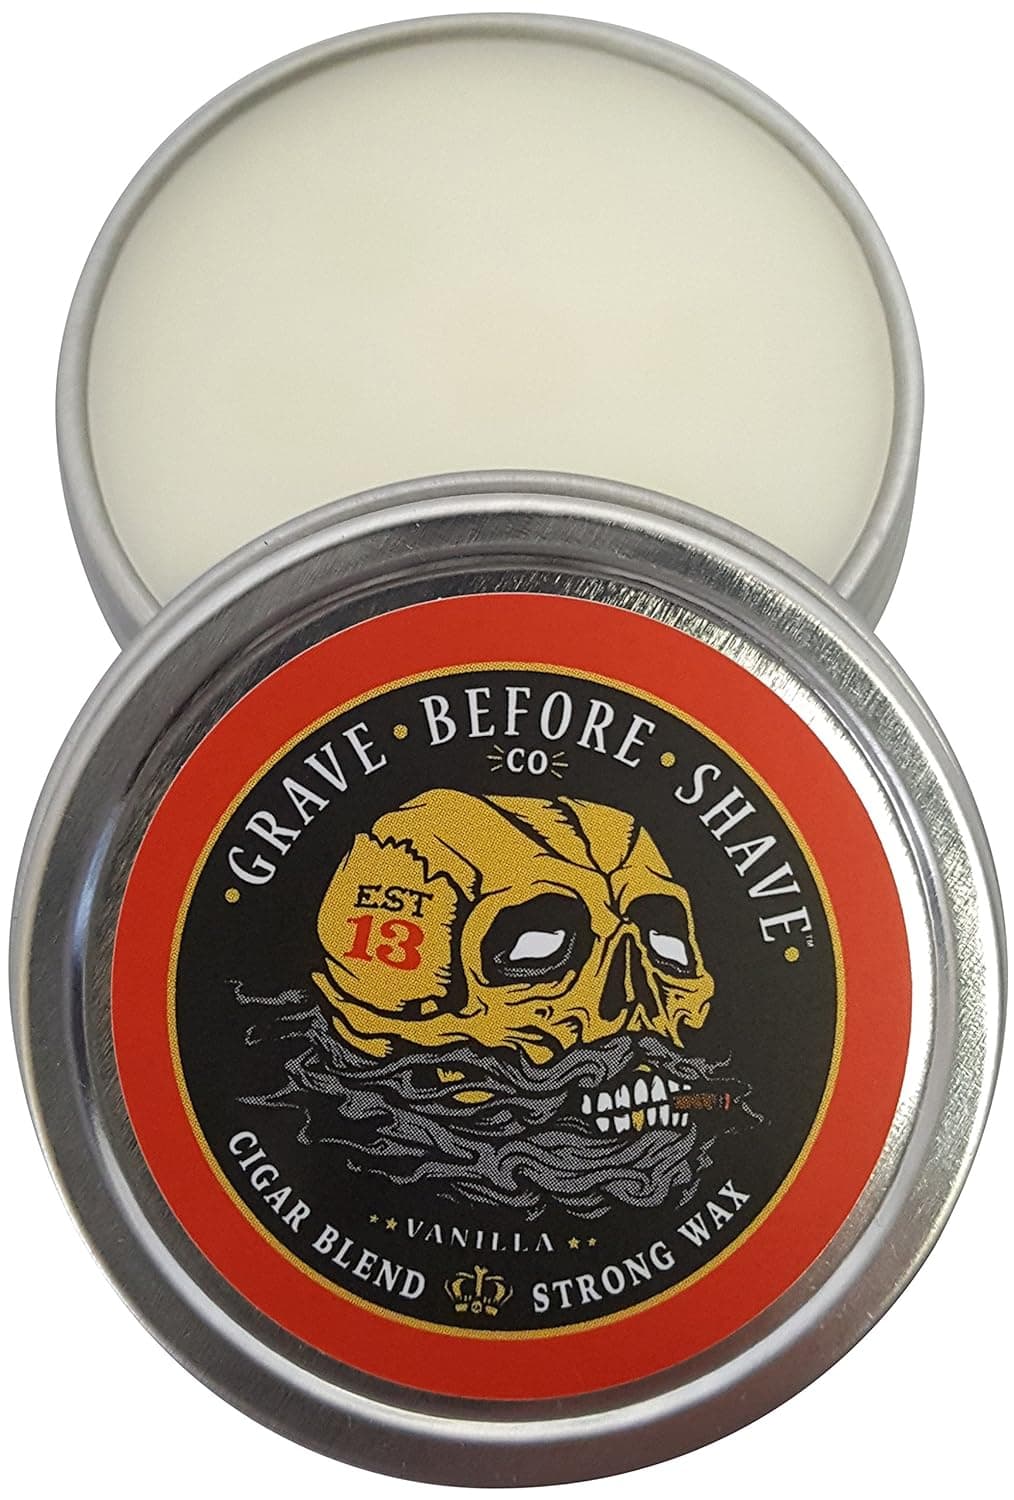 Grave Before Shave's Fisticuffs Cigar Blend Strong Hold Mustache Wax 1 OZ. Tin